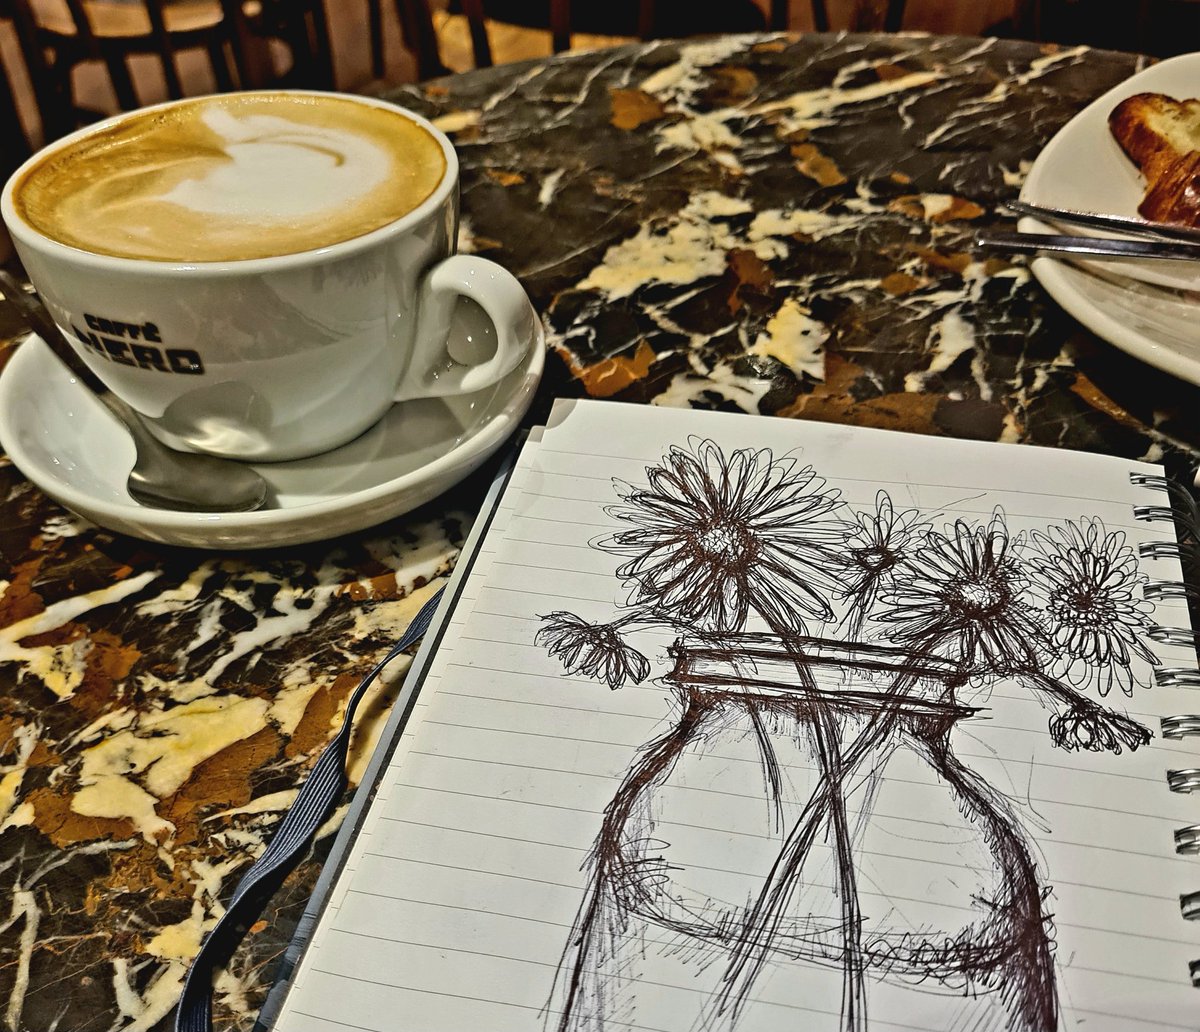 Pre-work coffee and sketching #artists #artistsontwitter #dontwanttogo #workcalls #before7am #prework #Coffee #CoffeeLover #Sketching